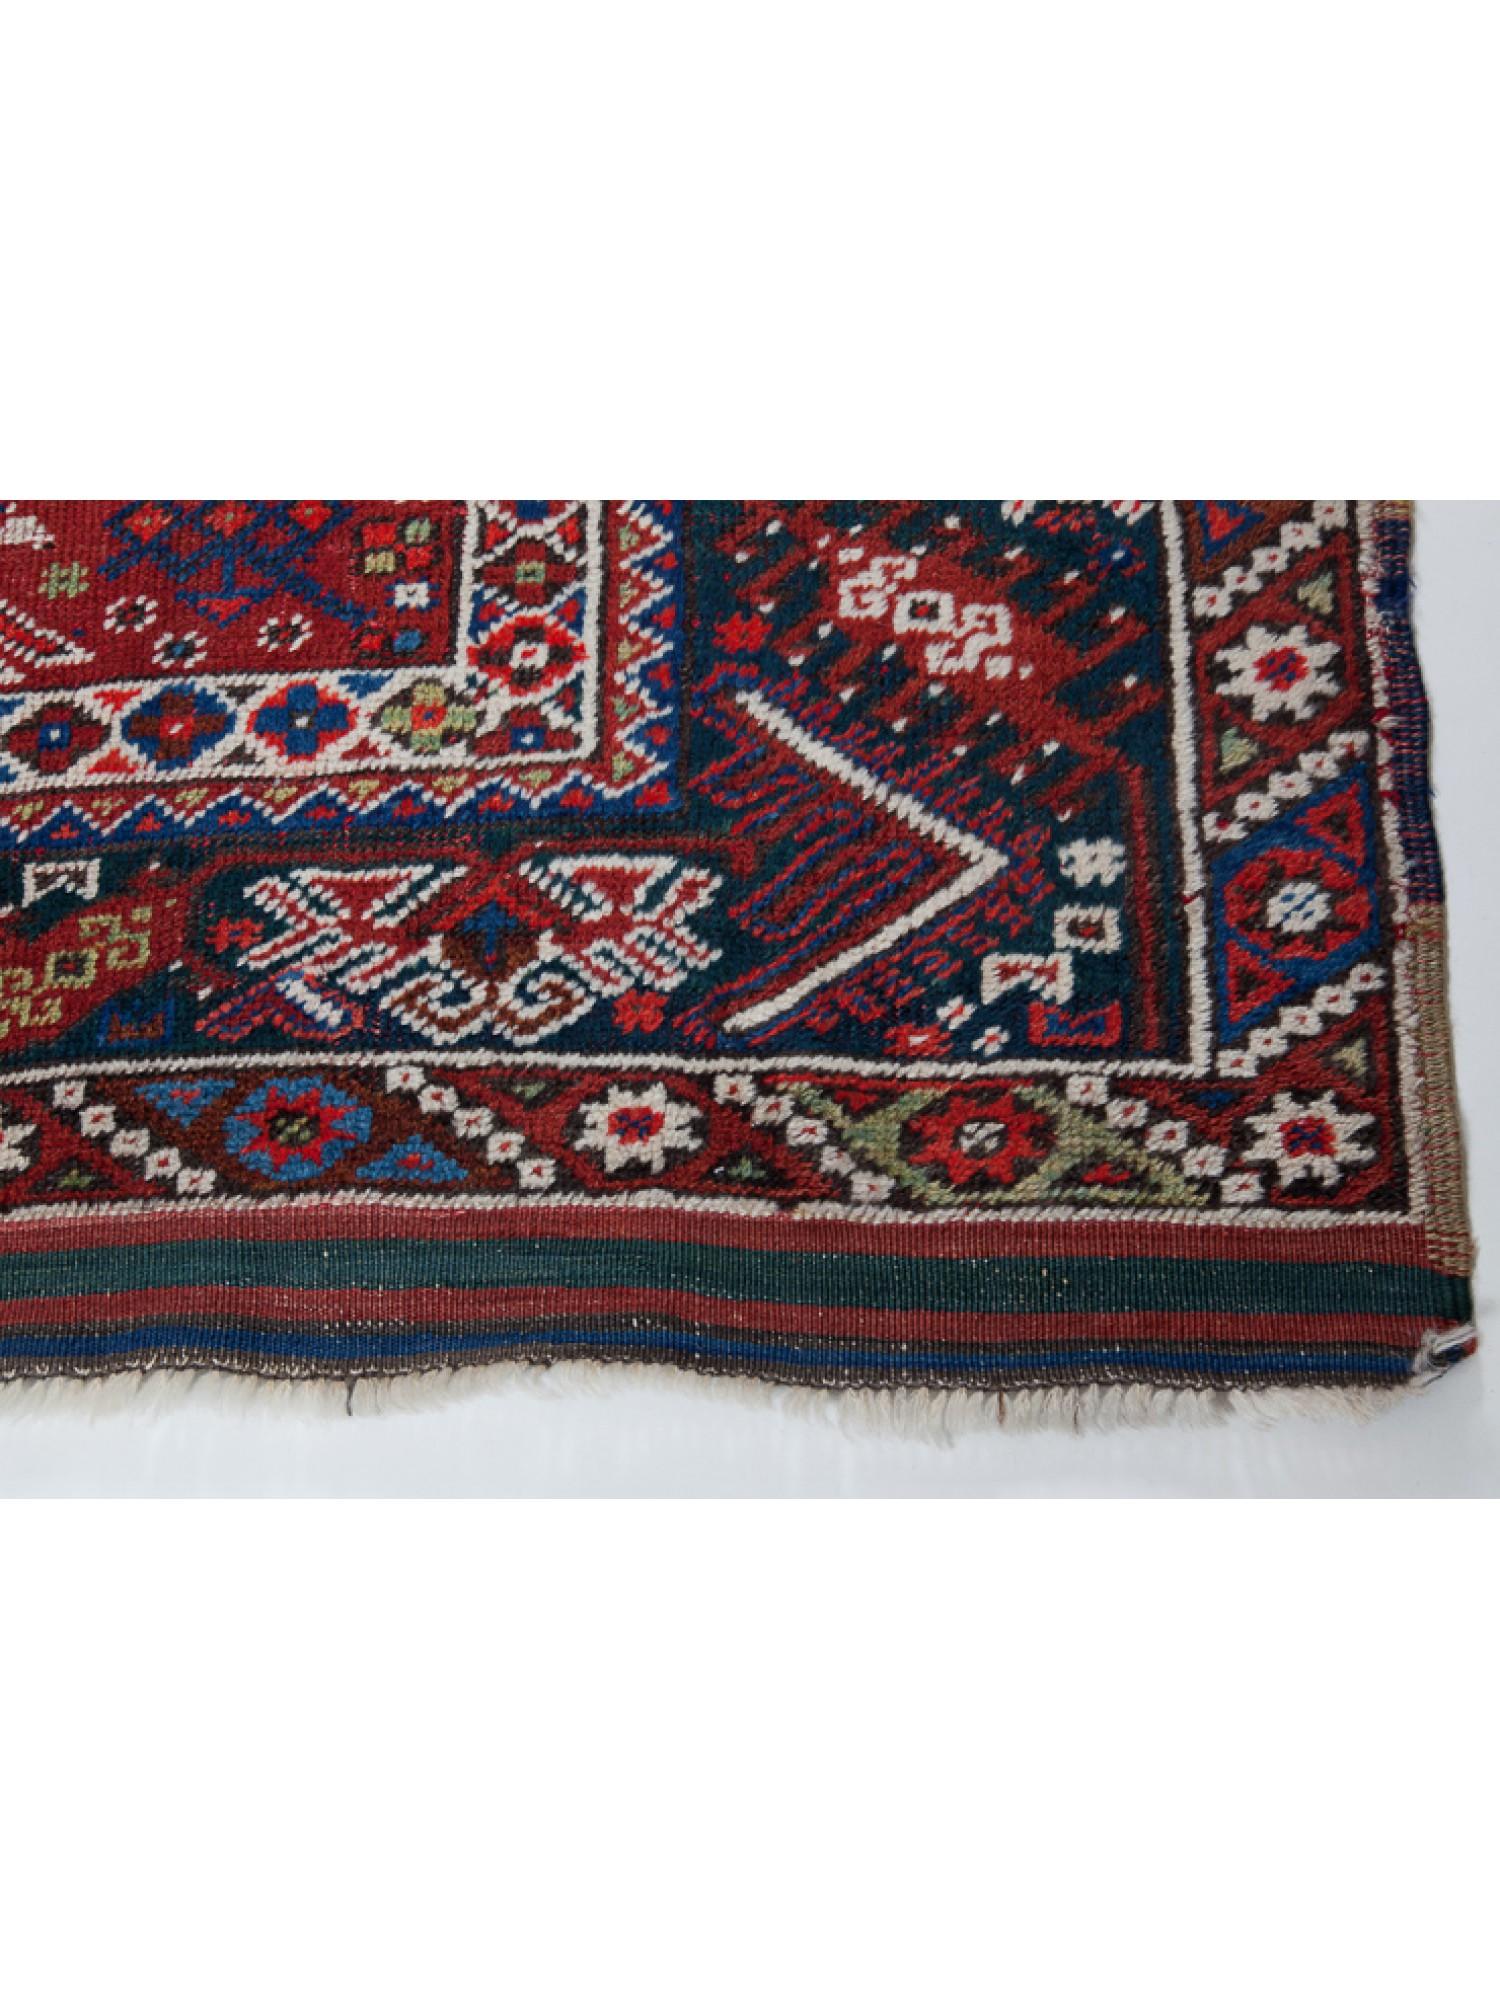 This is an antique Dosemealti Rug from Southern Anatolia, the Antalya region with a large border, geometric floral pattern ground, good condition, and beautiful color composition.

Antique Antalya rugs, also known as Antalya kilims, are